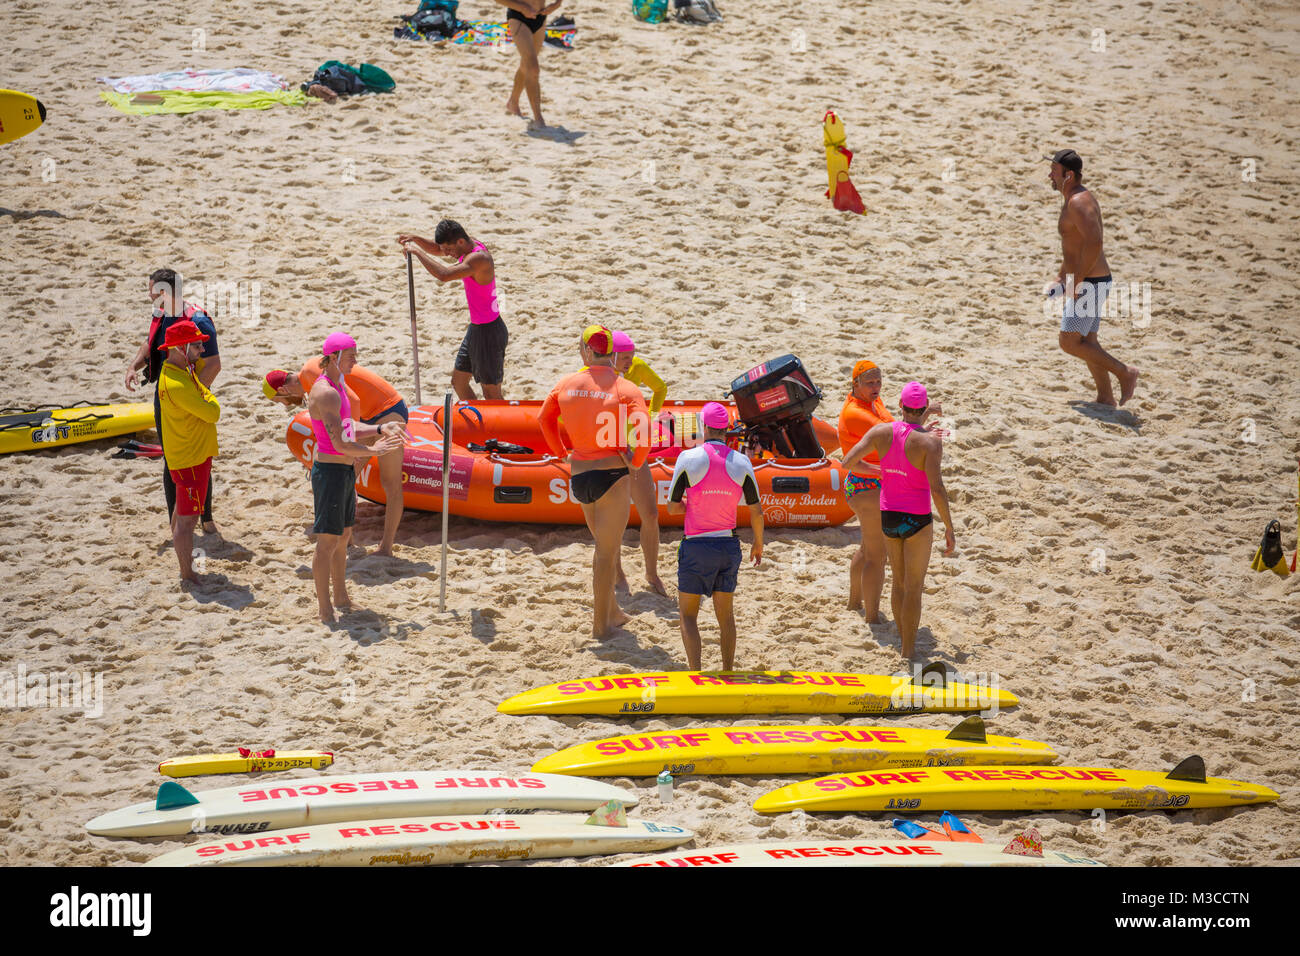 Volunteer surf rescue people on Tamarama beach in Sydney eastern suburbs, patrolling the beach and keeping people safe Stock Photo